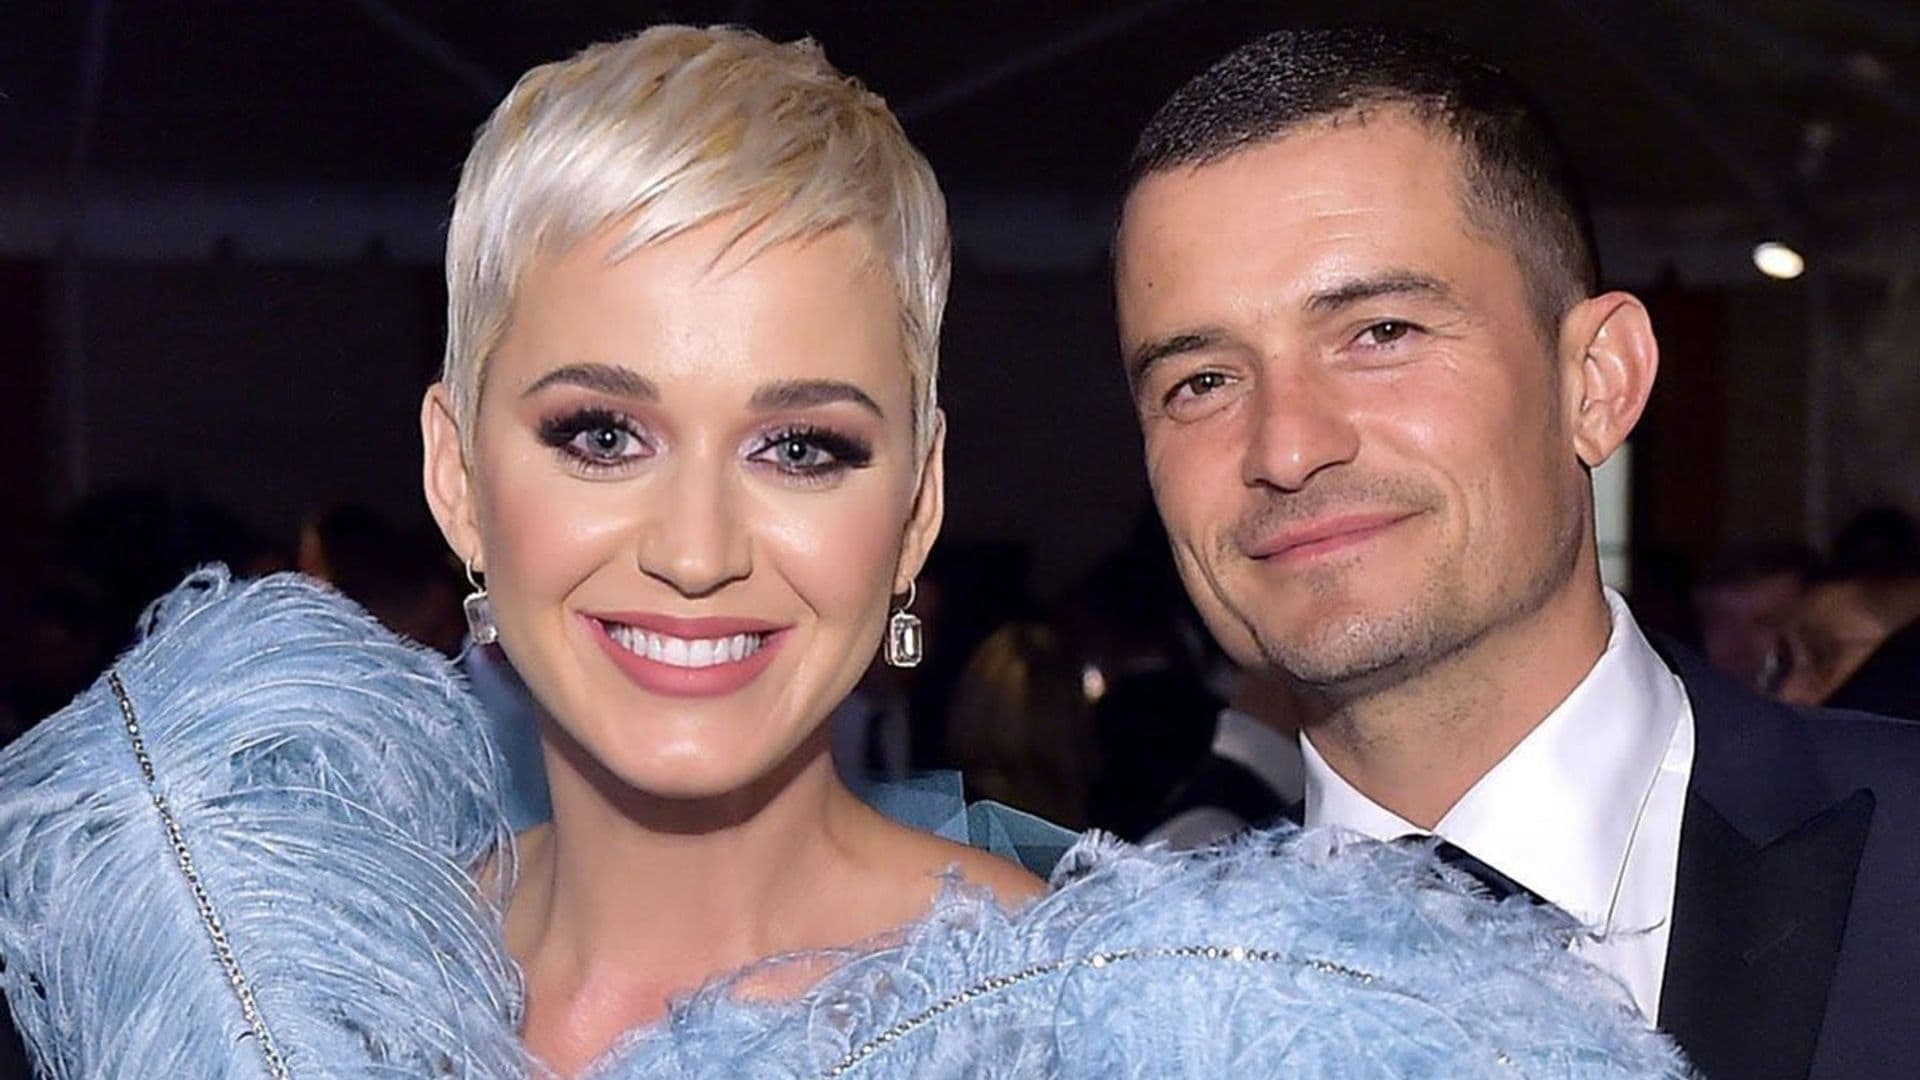 Katy Perry and Orlando Bloom packed on the PDA while on a boat in Capri, Italy